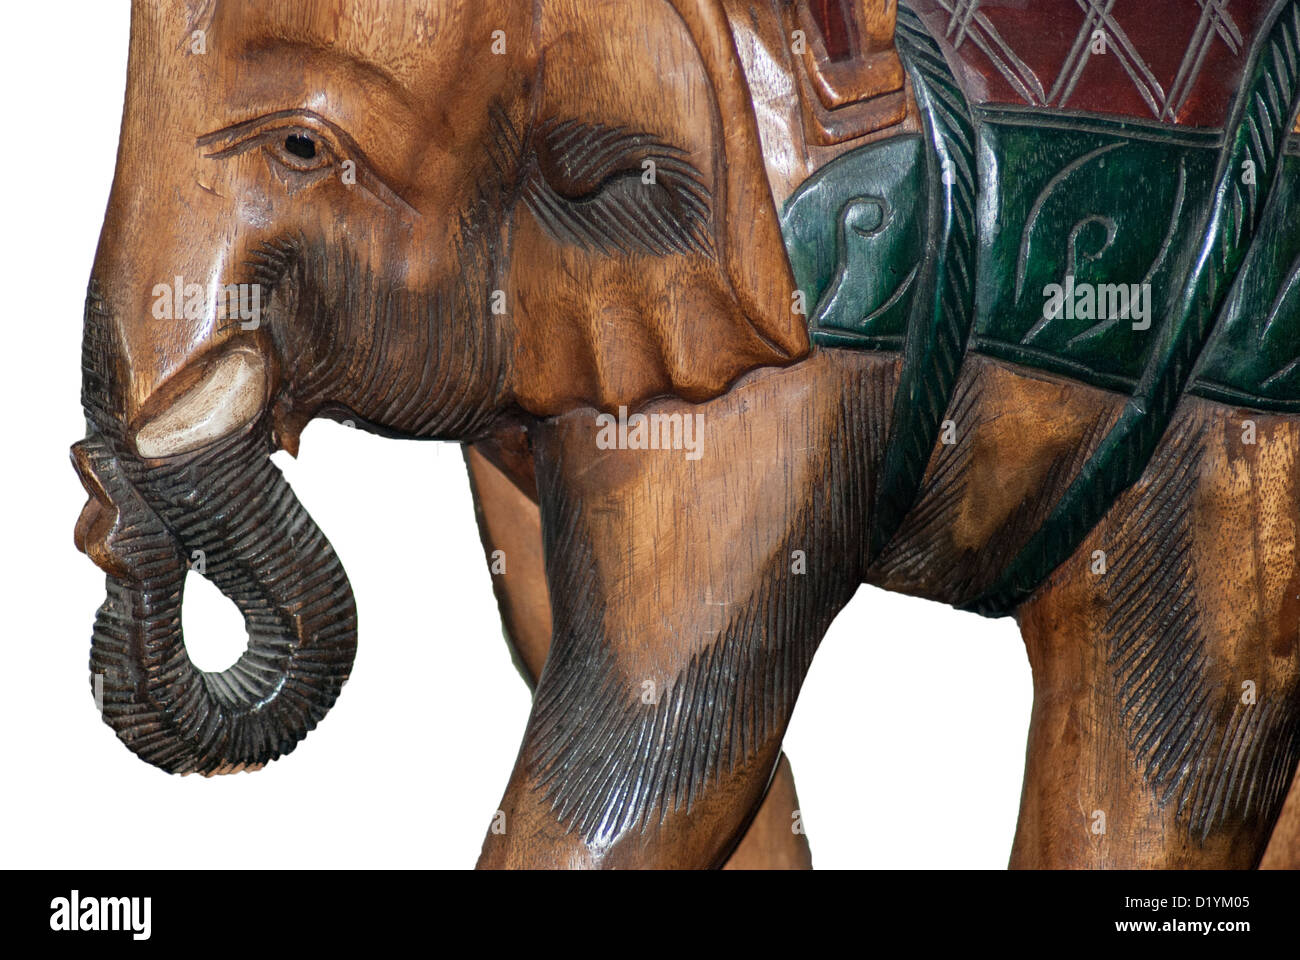 Large wooden carved elephant cut out close up Stock Photo